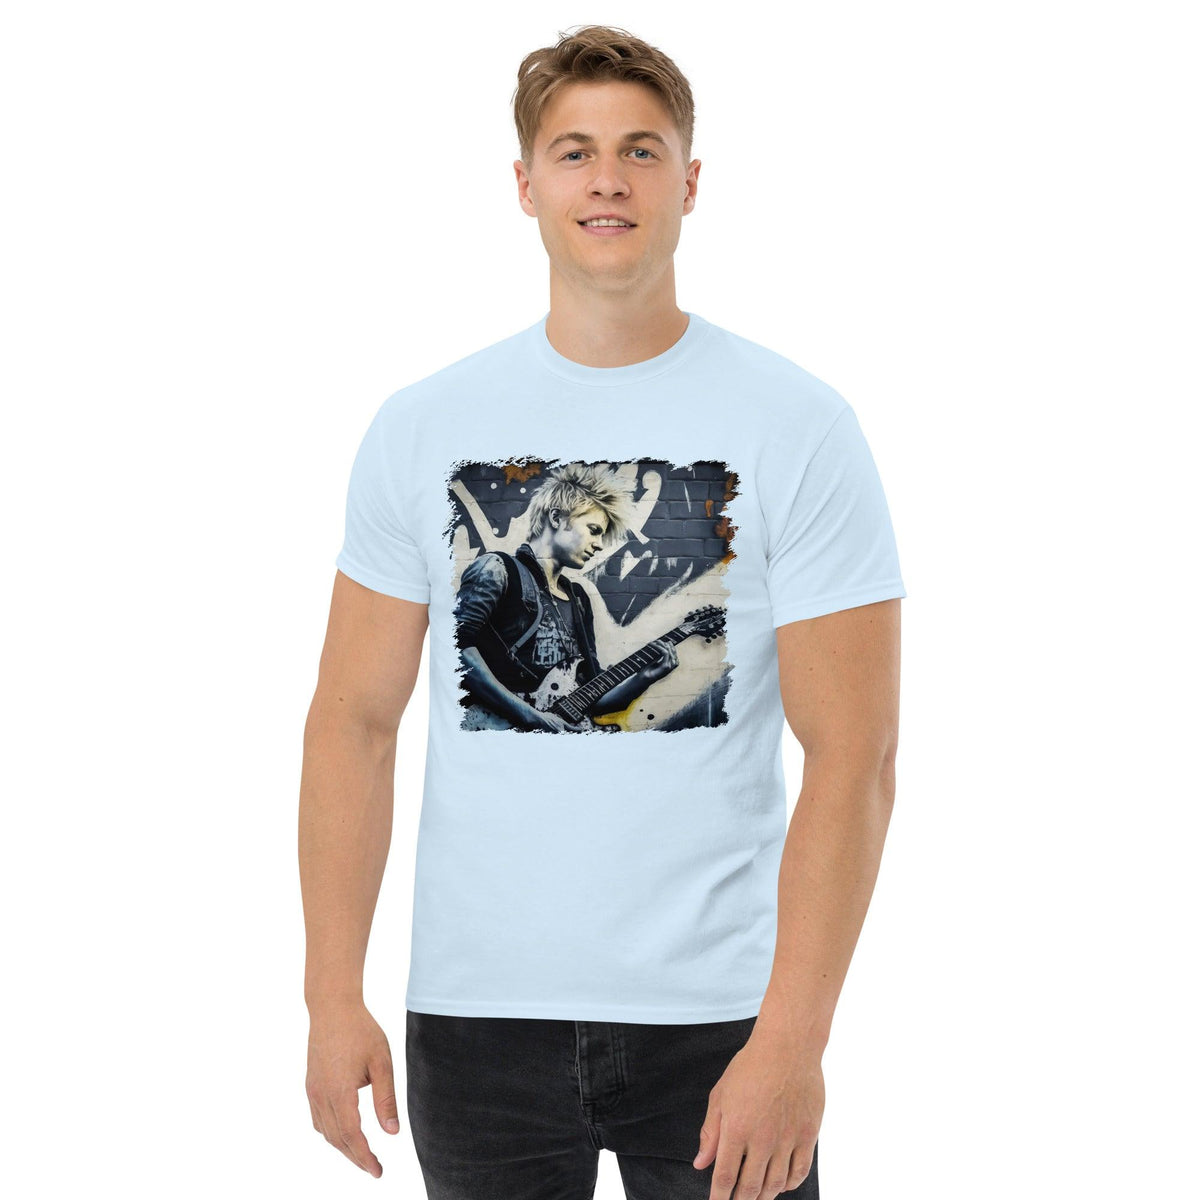 Dazzling The Crowd Men's classic tee - Beyond T-shirts